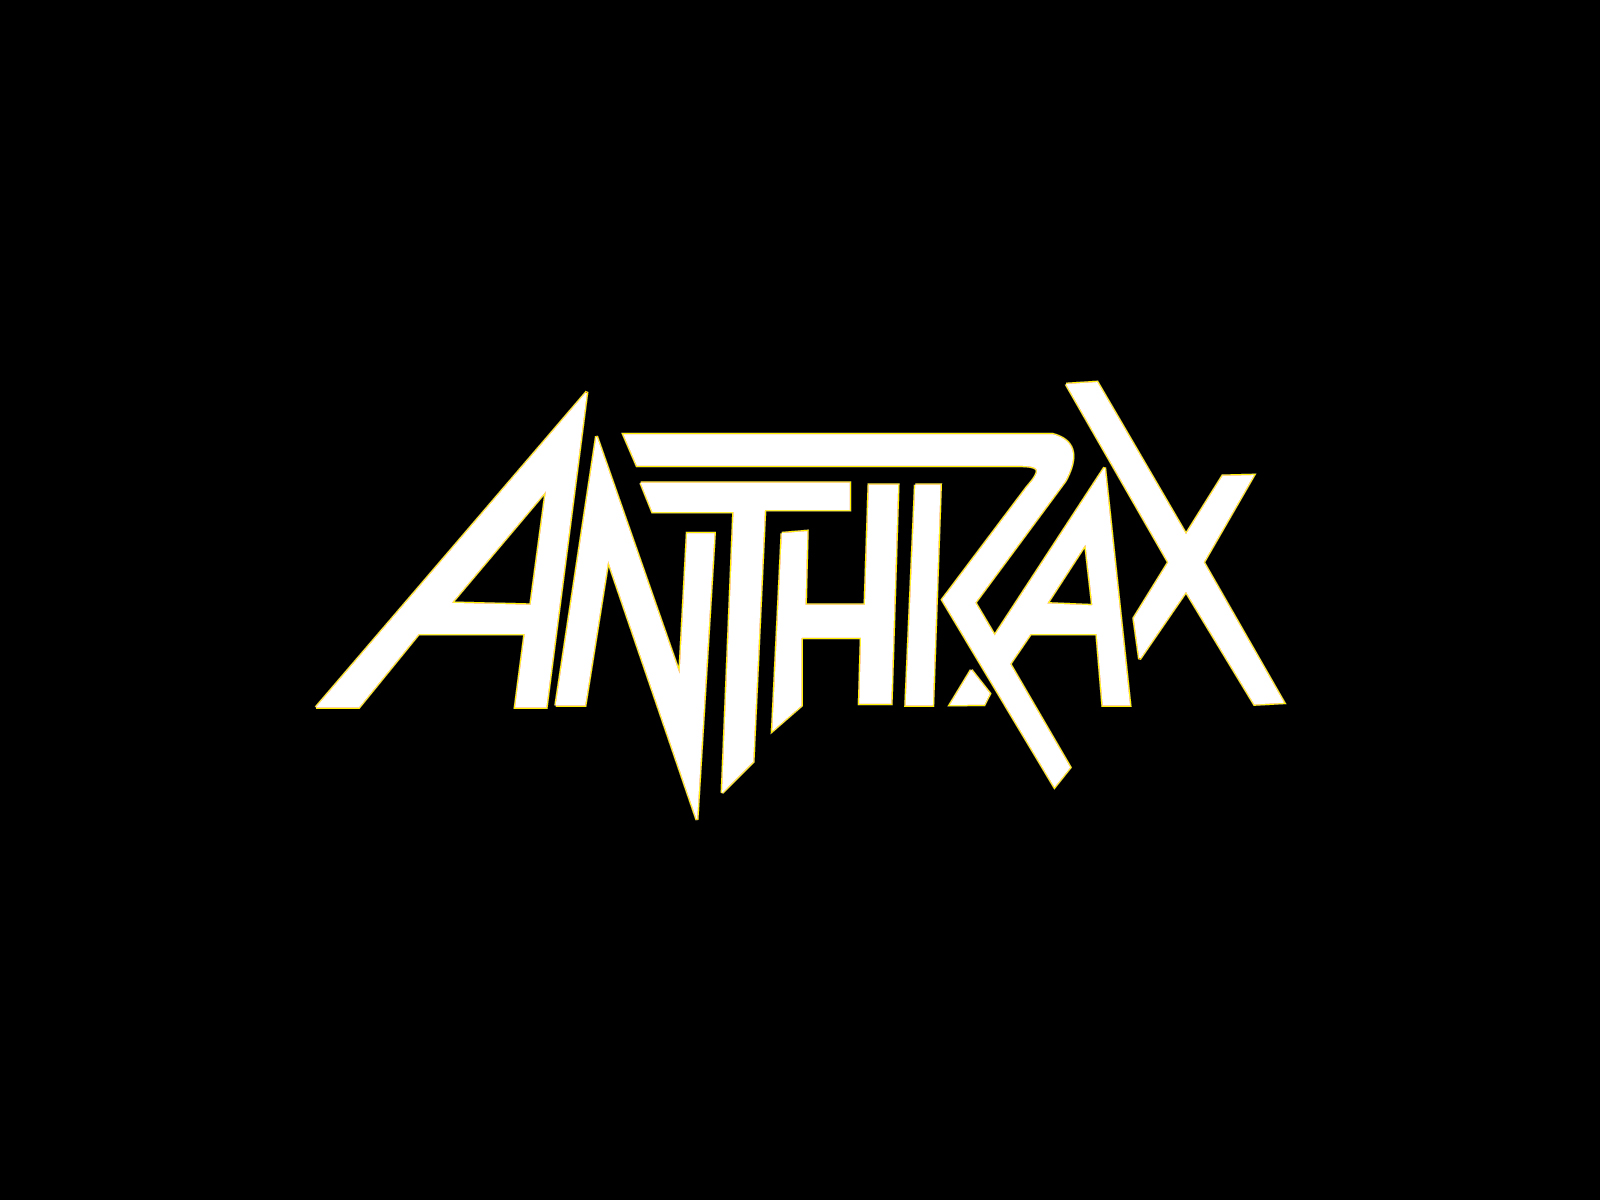 Anthrax Images & Stock Pictures. Royalty Free Anthrax ...